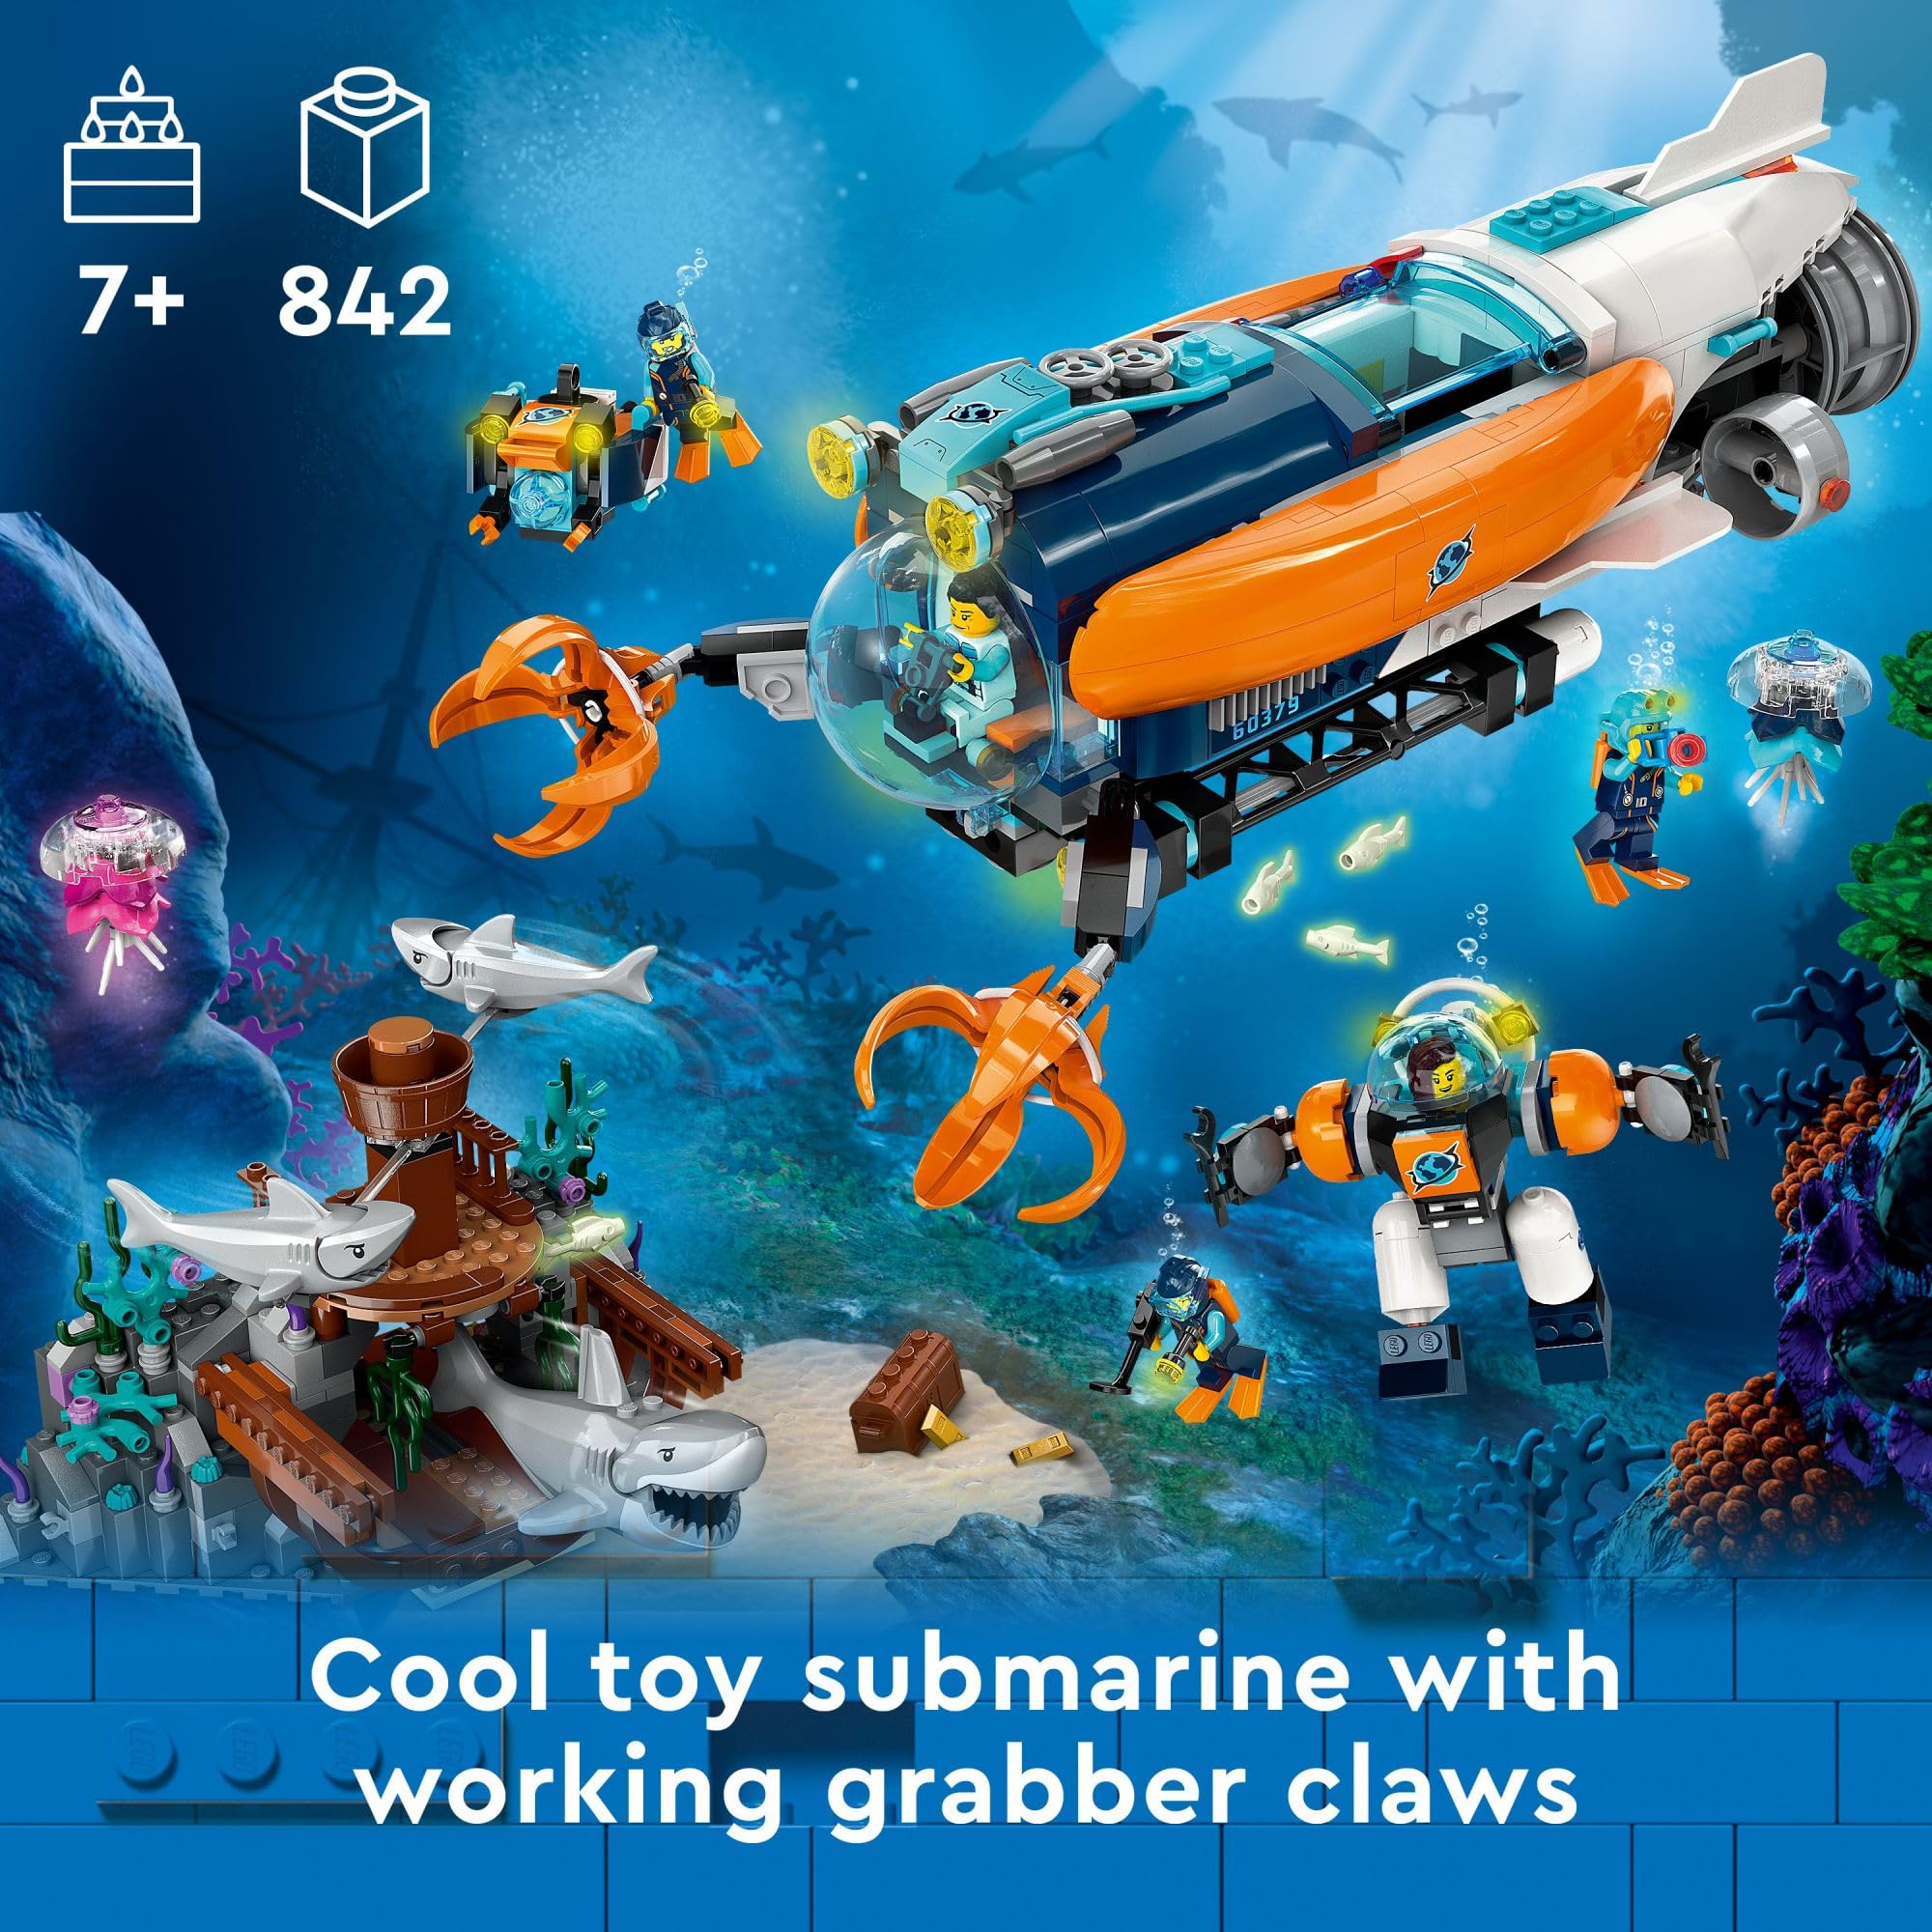 LEGO City Deep-Sea Explorer Submarine 60379 Building Toy Set, Ocean Submarine Playset with Shipwreck Setting, 6 Minifigures and 3 Shark Figures for Imaginative Play, A Gift Idea for Ages 7+